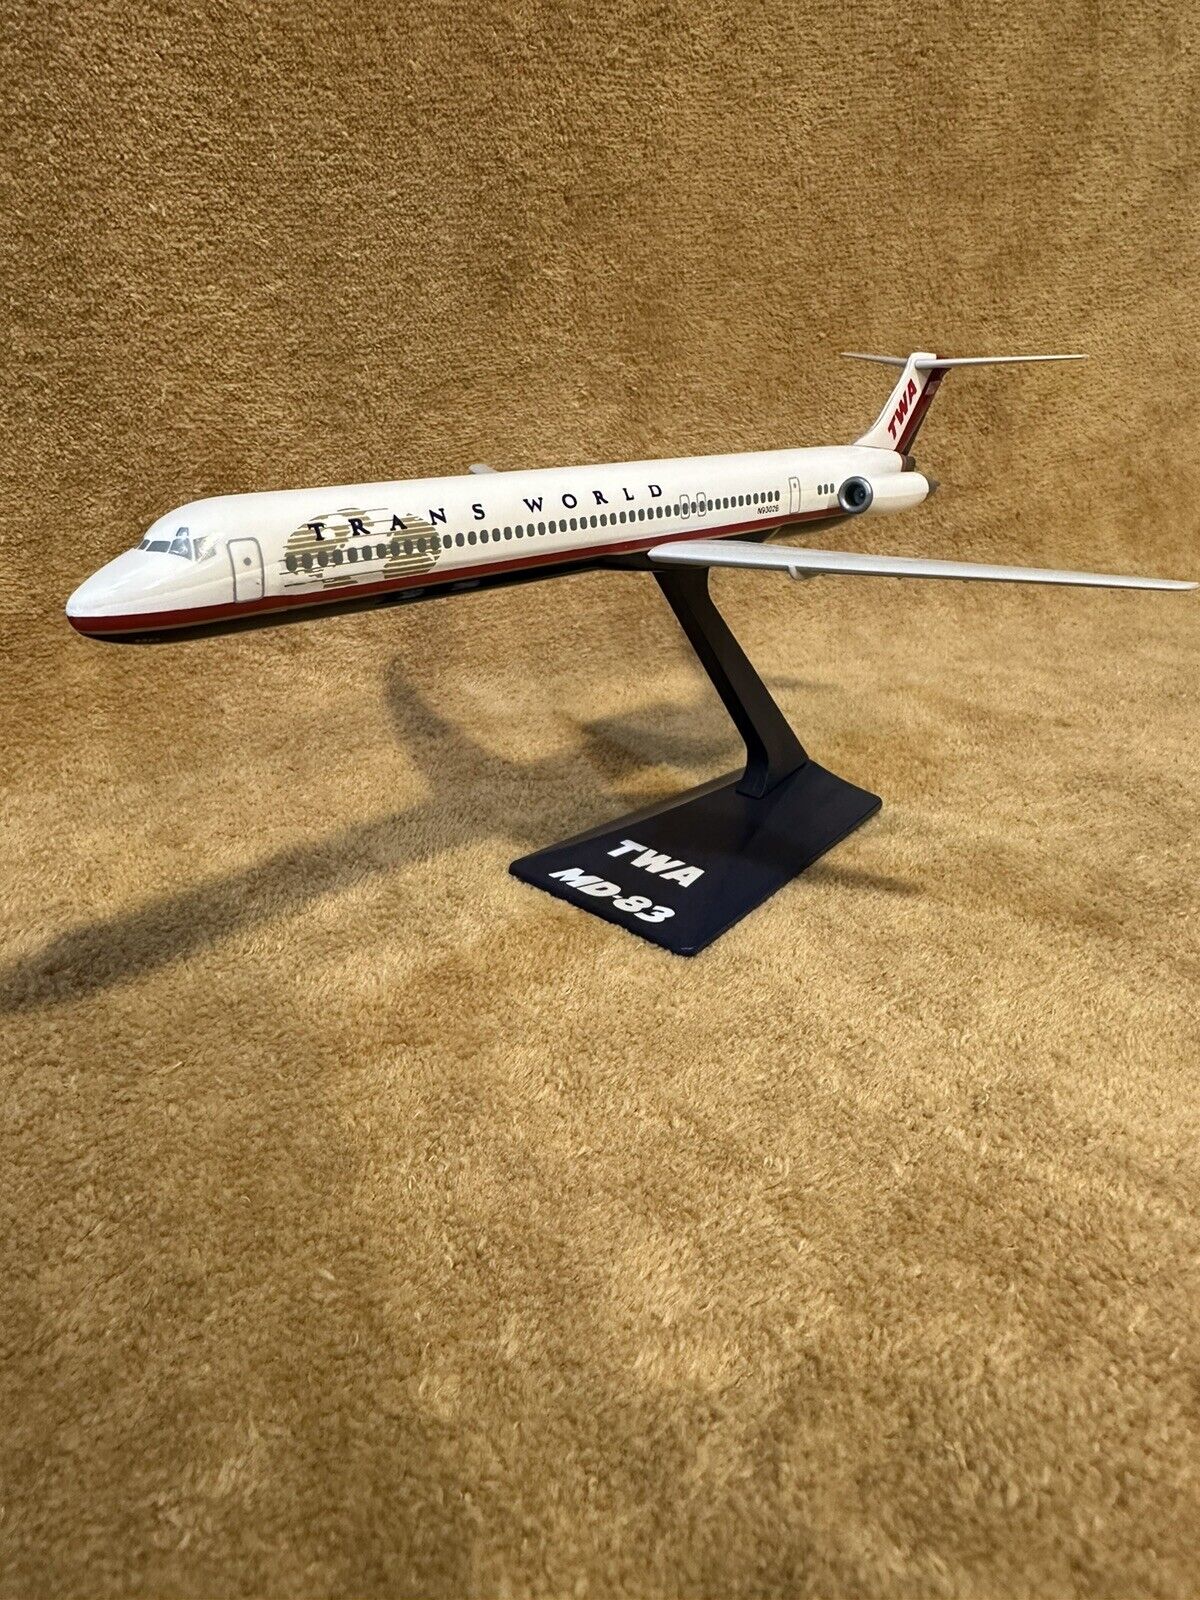 TWA Trans World Airlines MD-83 Model Airplane